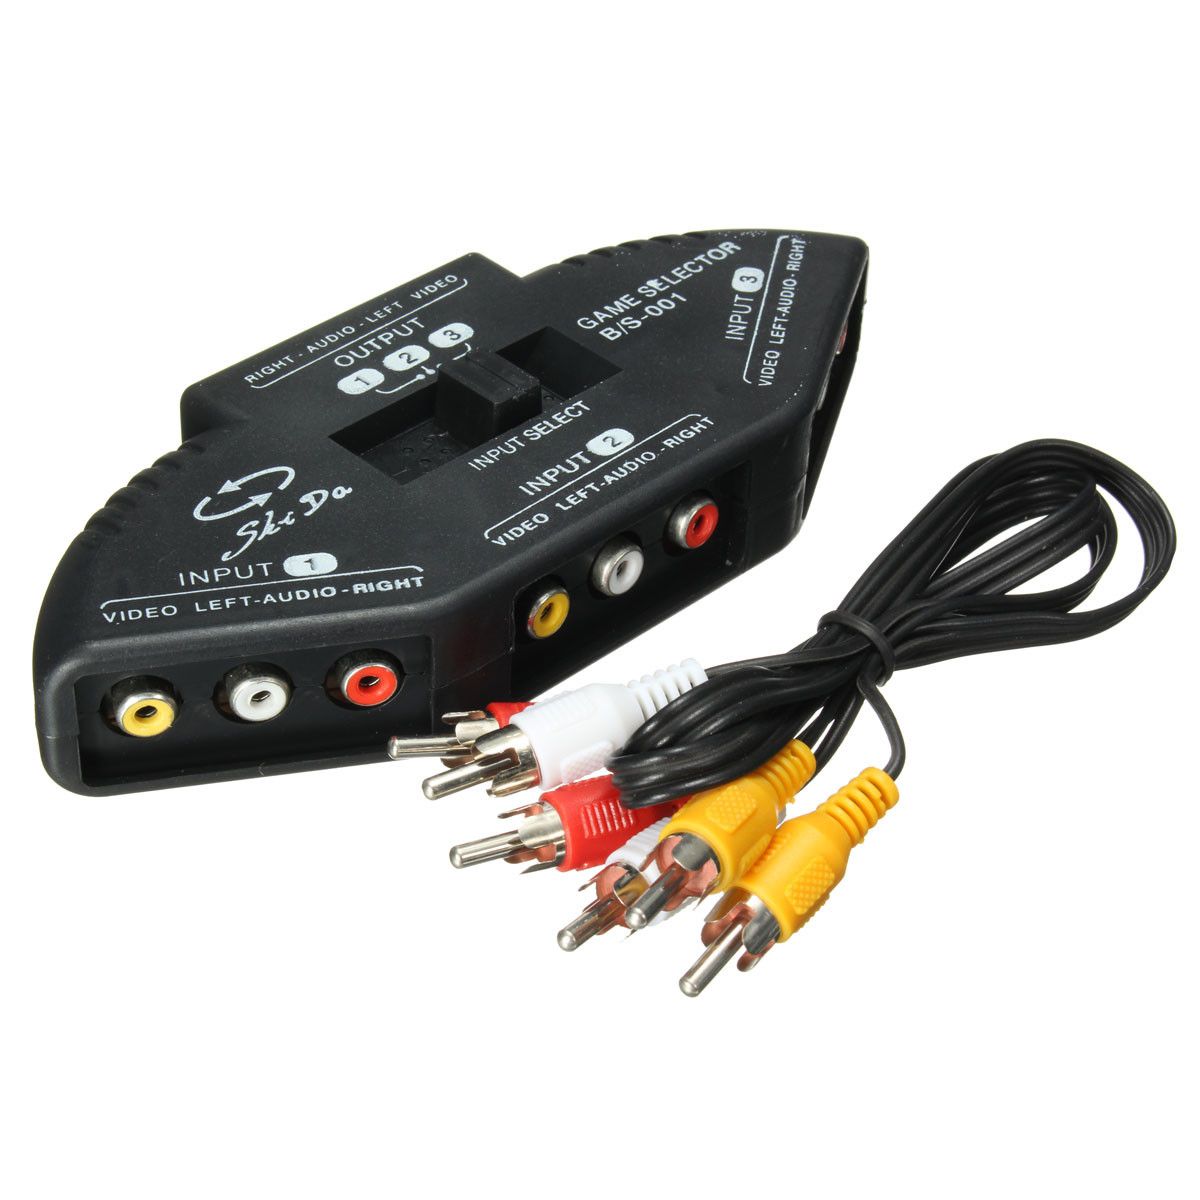 3-Way-Audio-Video-AV-RCA-Switch-Box-Composite-Selector-Splitter-With-FT-Cables-1092102